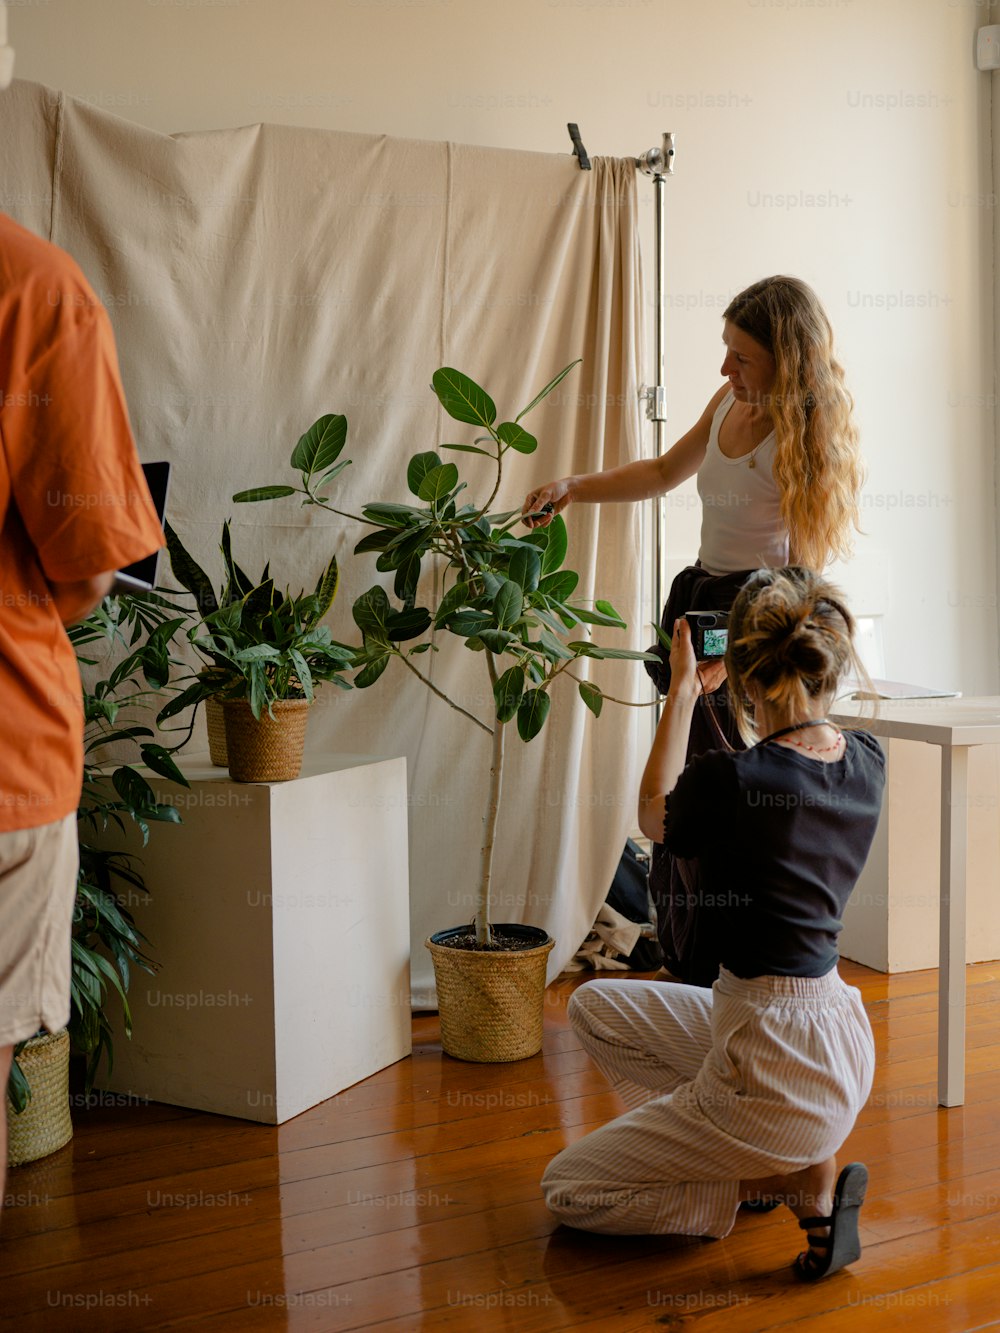 a woman is taking a picture of a potted plant